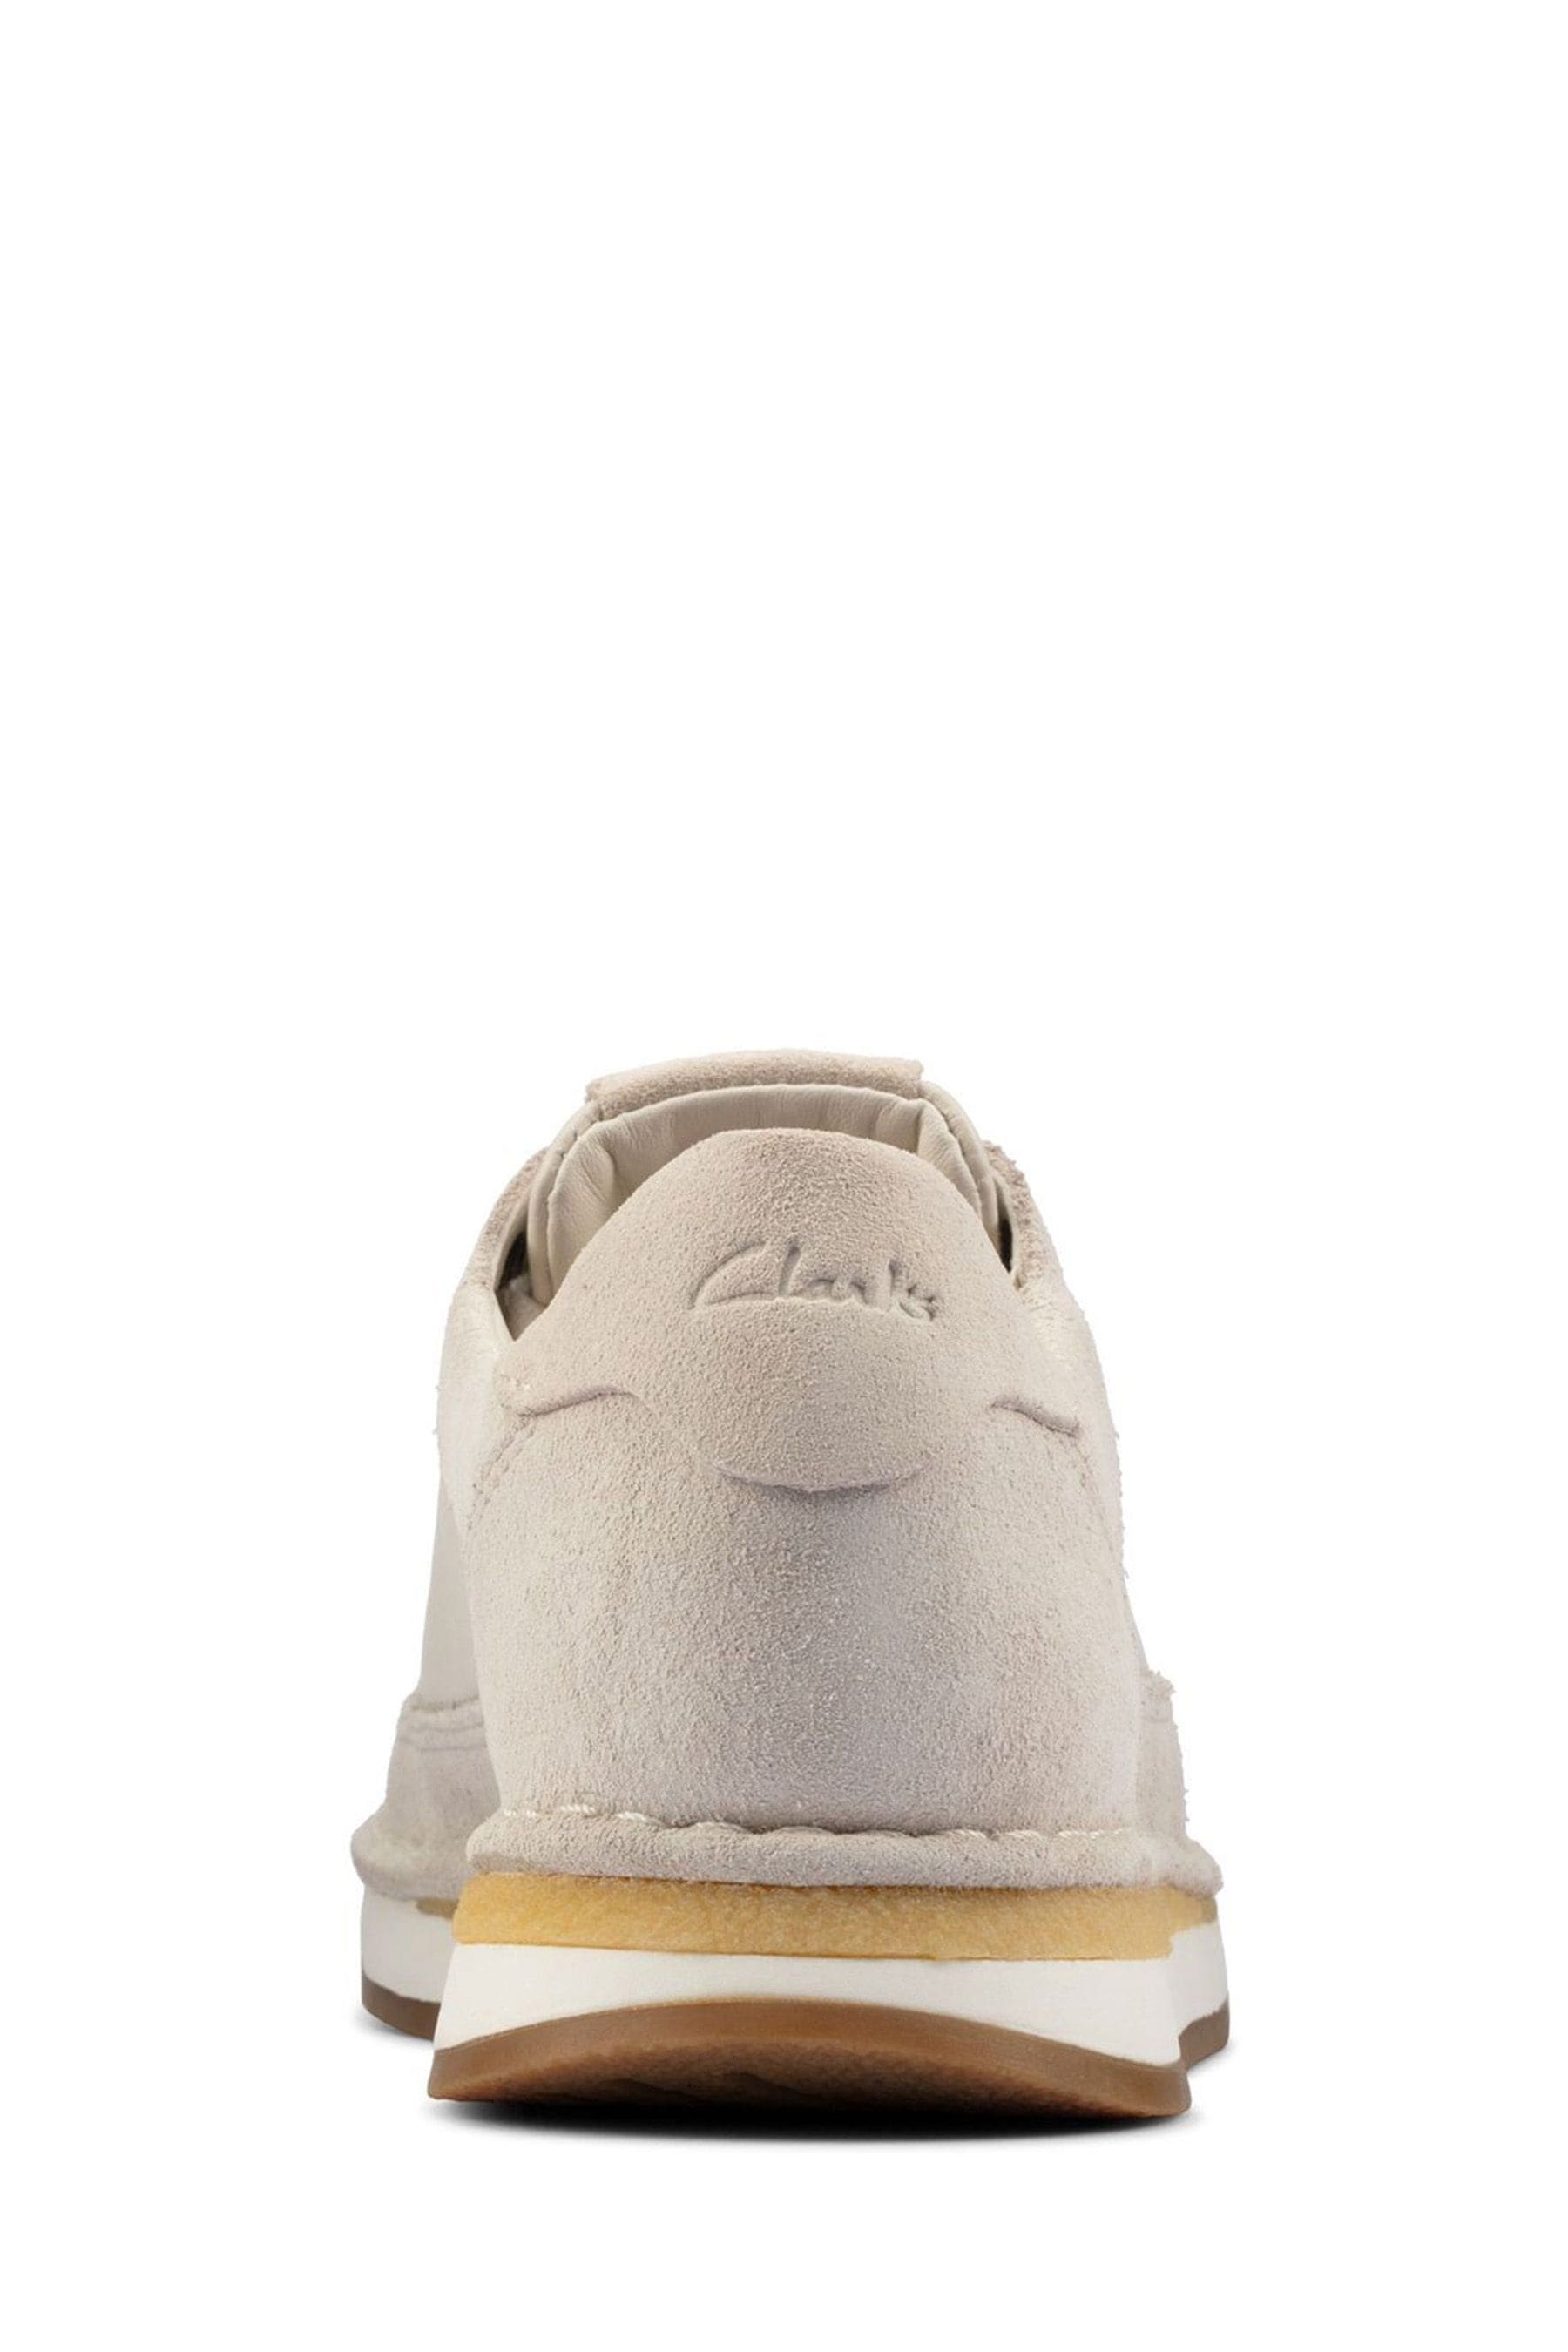 Buy Clarks White Suede Craftrun Lace Trainers from the Next UK online shop